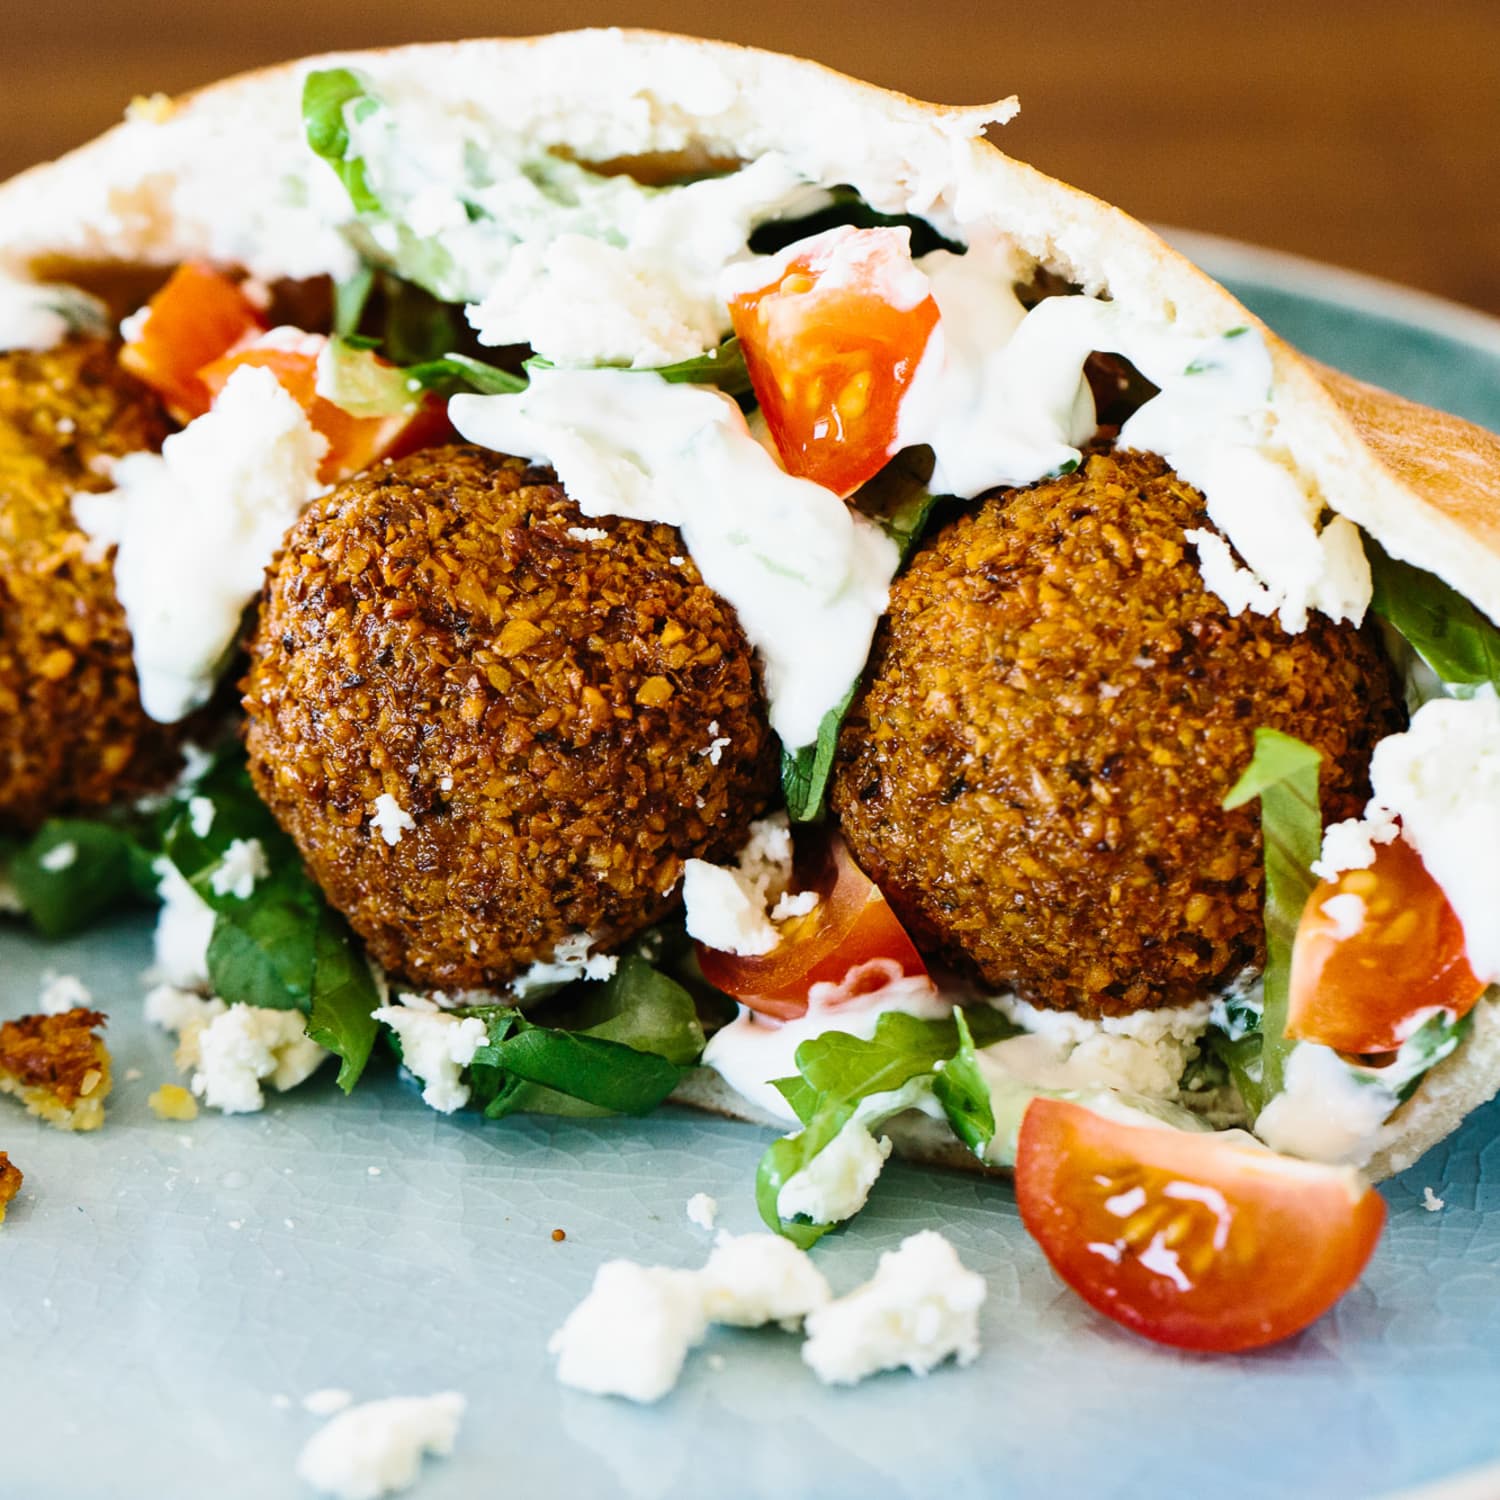 How To Make the Best Falafel at Home